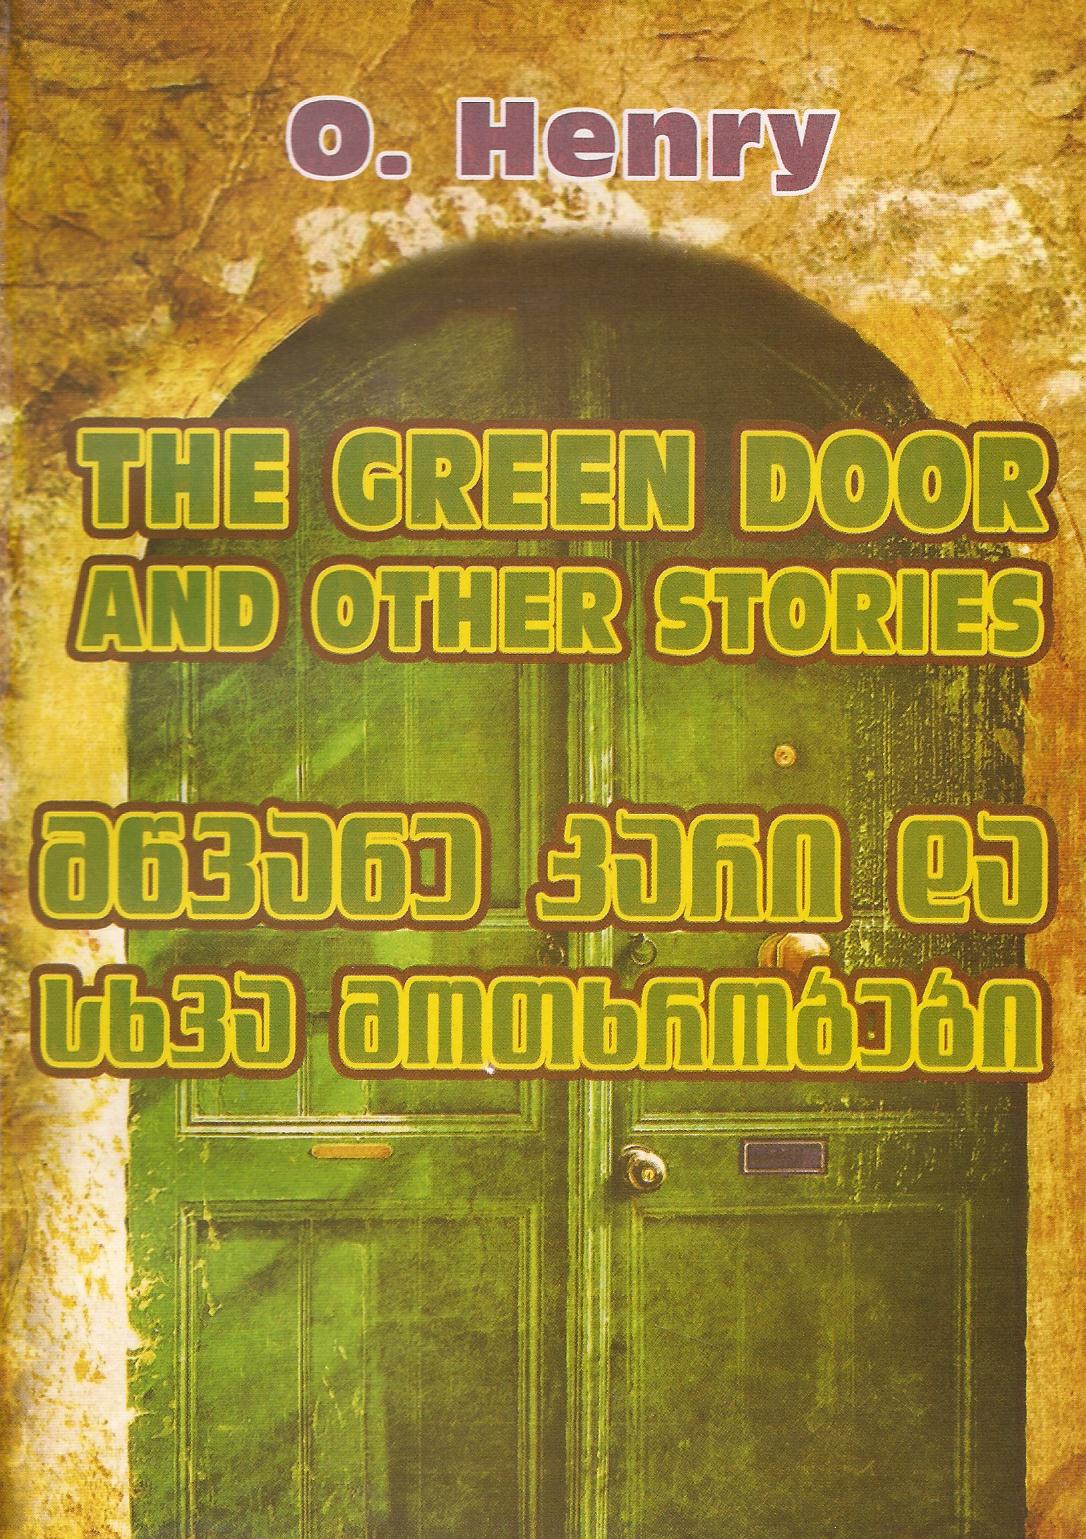 The Green Door and other Stories